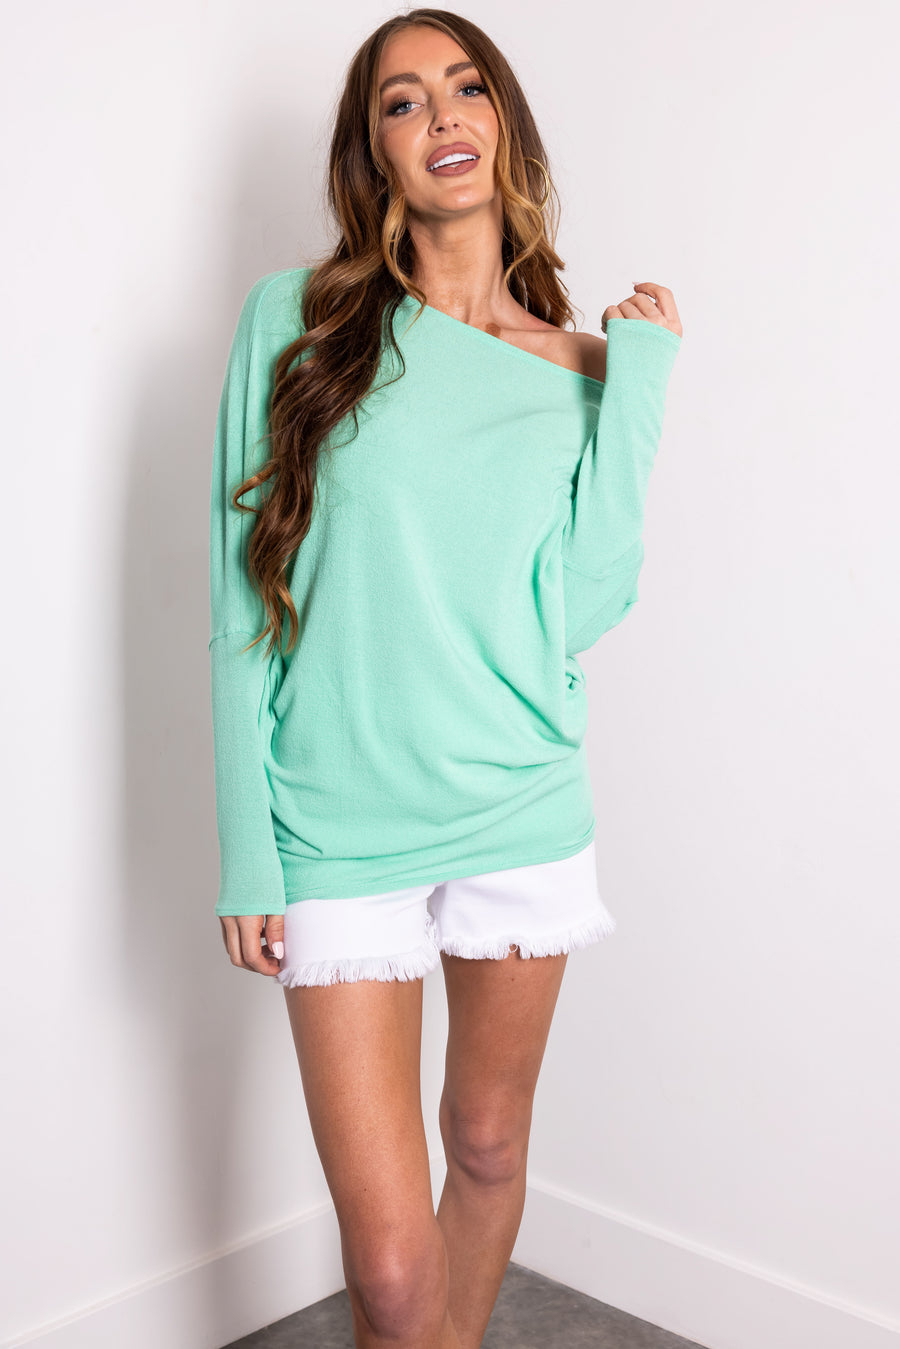 Seafoam Round Neck Knit Top with Long Dolman Sleeves